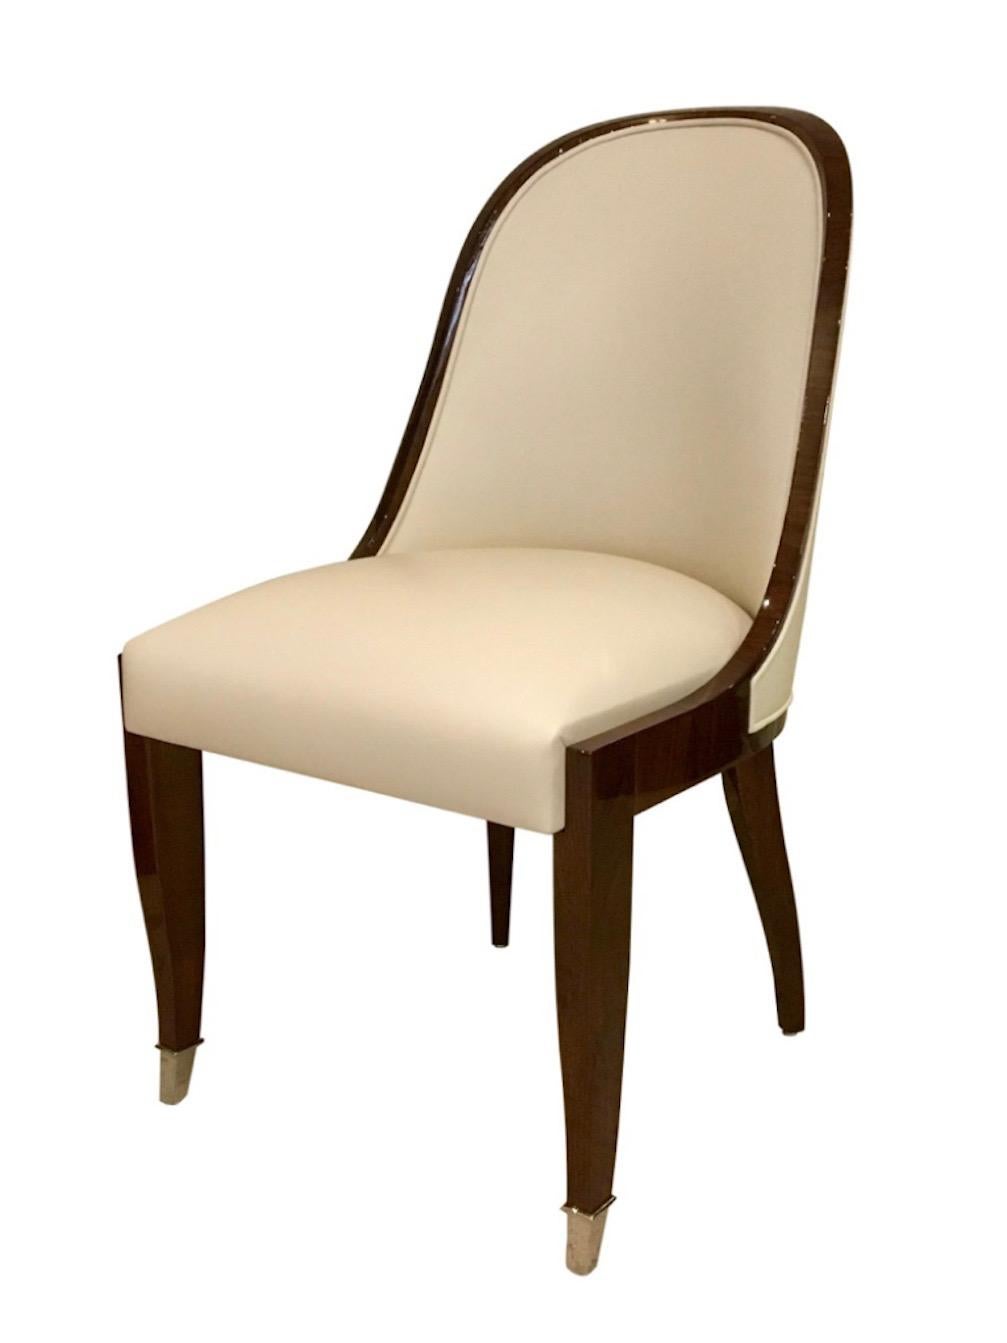 Chair with Wide Curved Backrest in Art Deco Style with Leather and Wood In New Condition For Sale In Ulm, DE